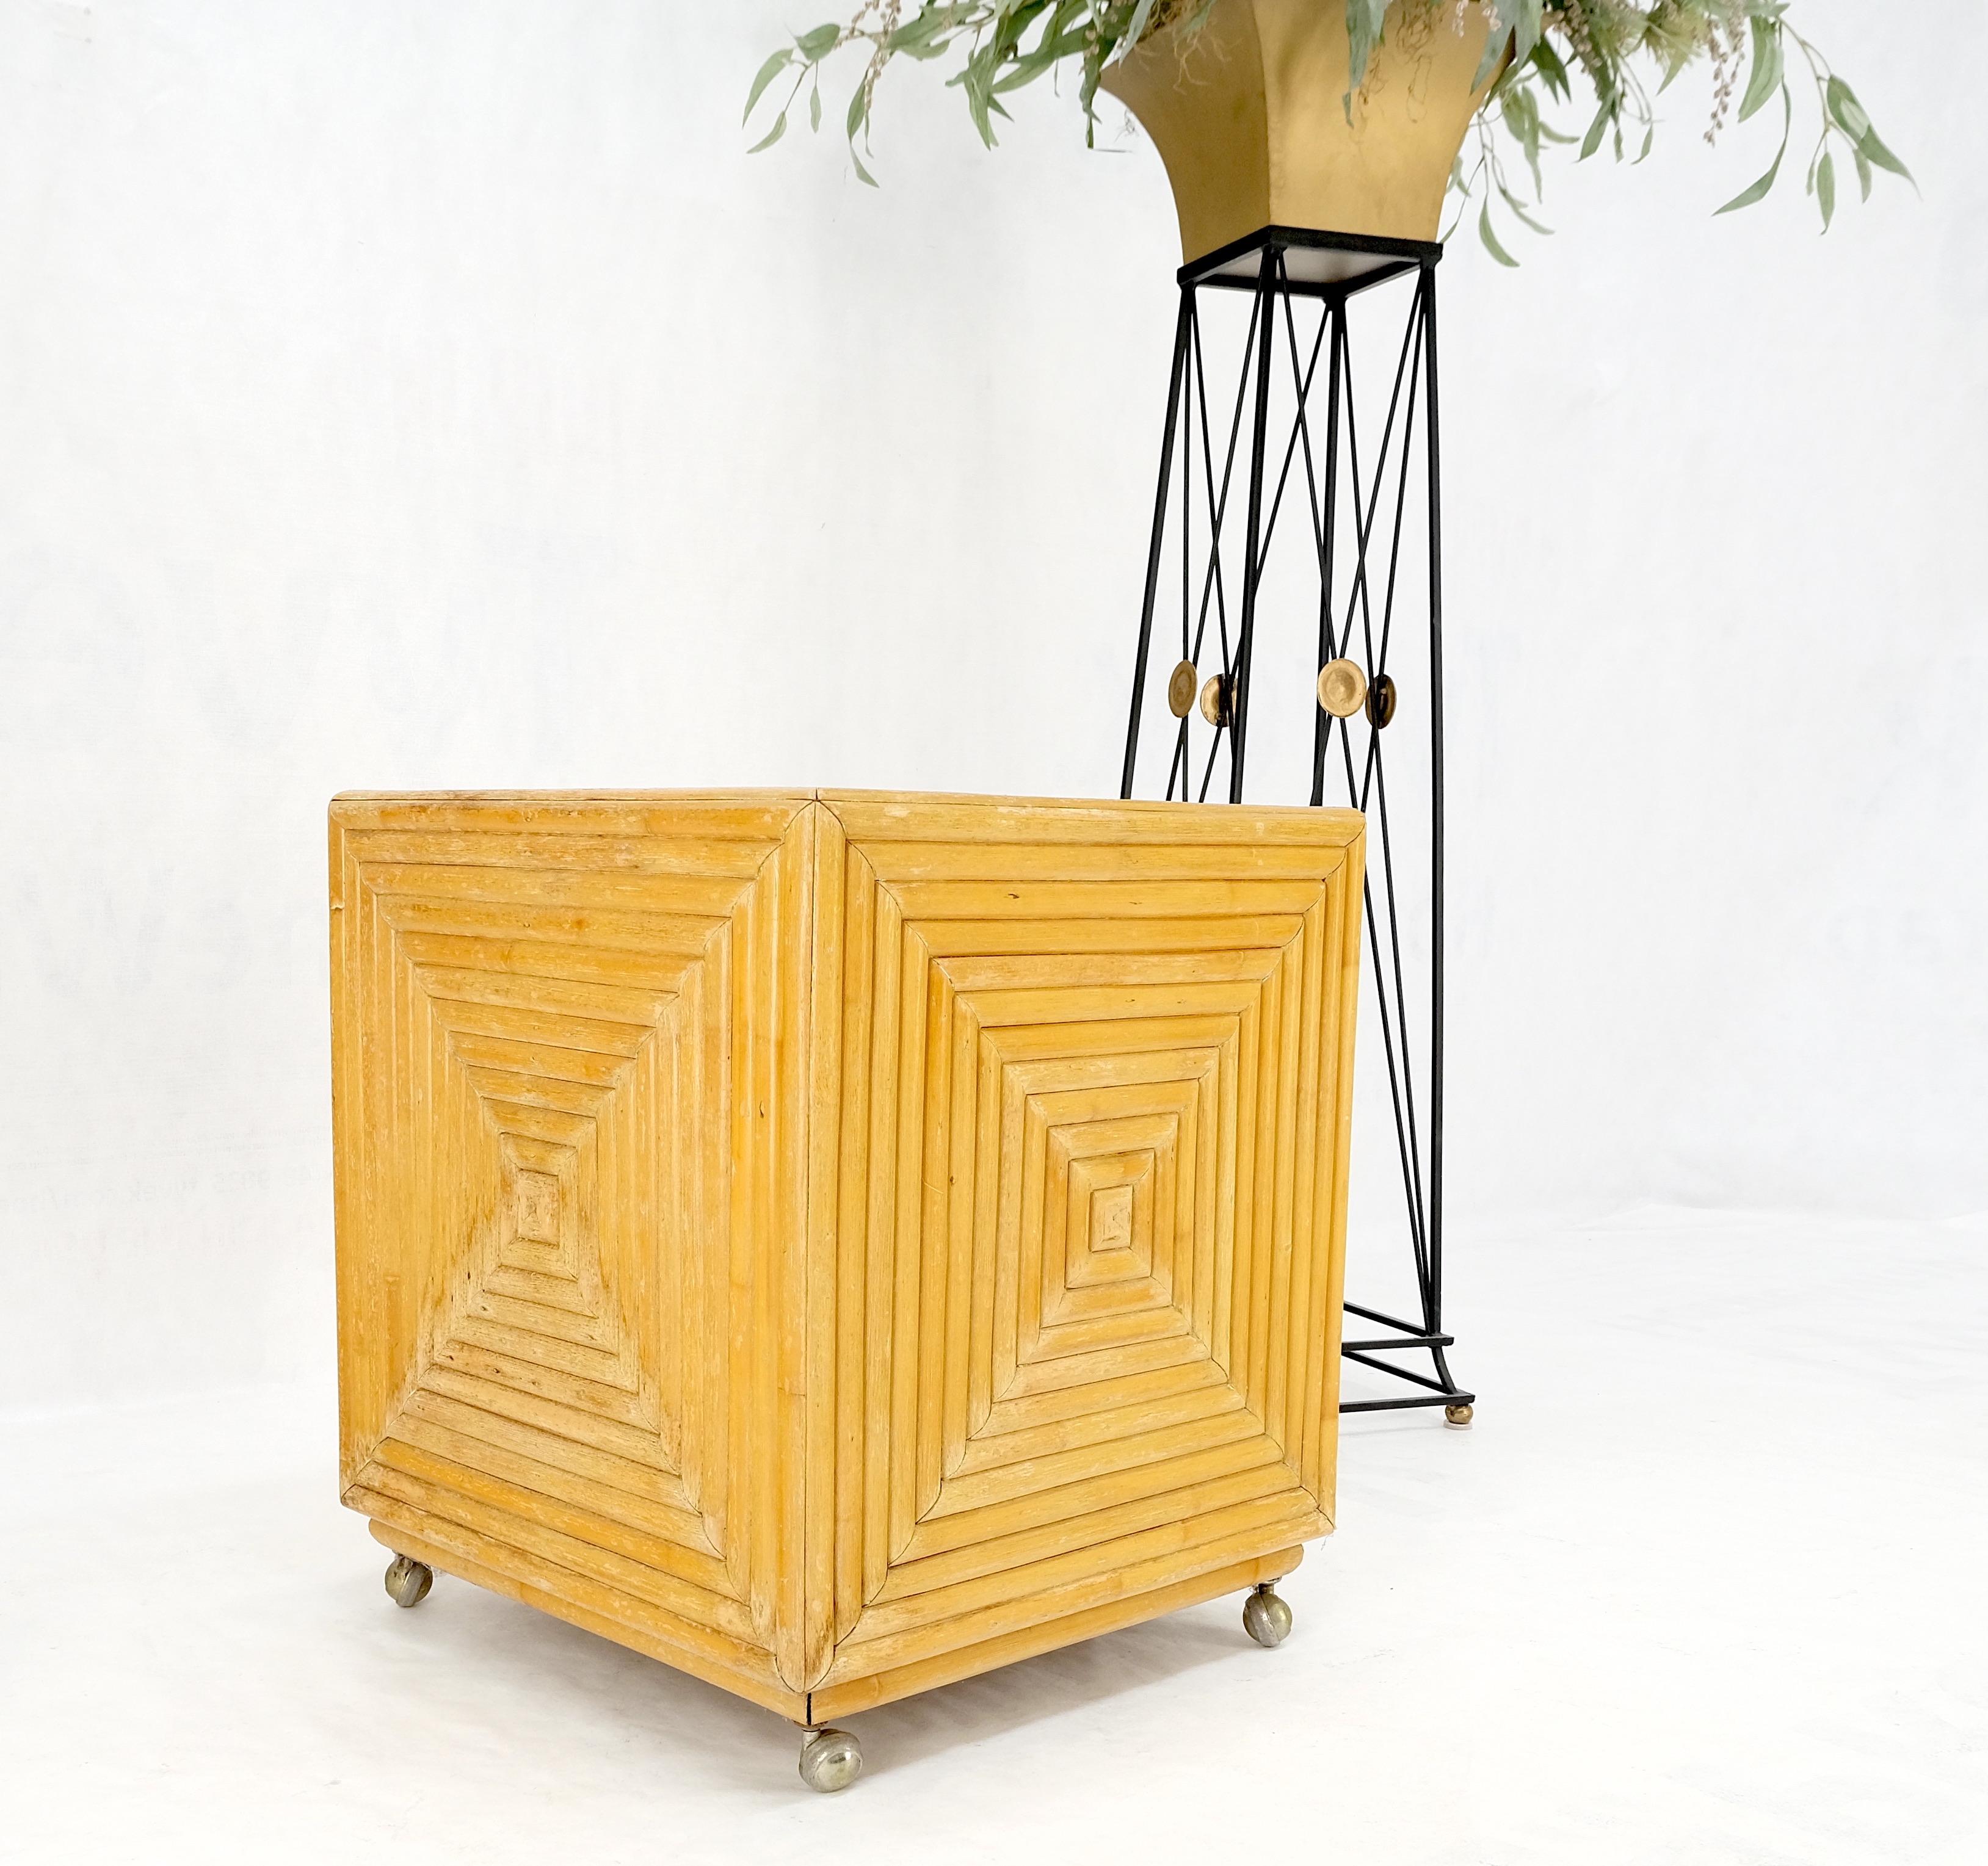 Lacquered Mid-Century Modern Reed Bamboo Rattan Square Cube Shape Planter Stand on Wheels For Sale